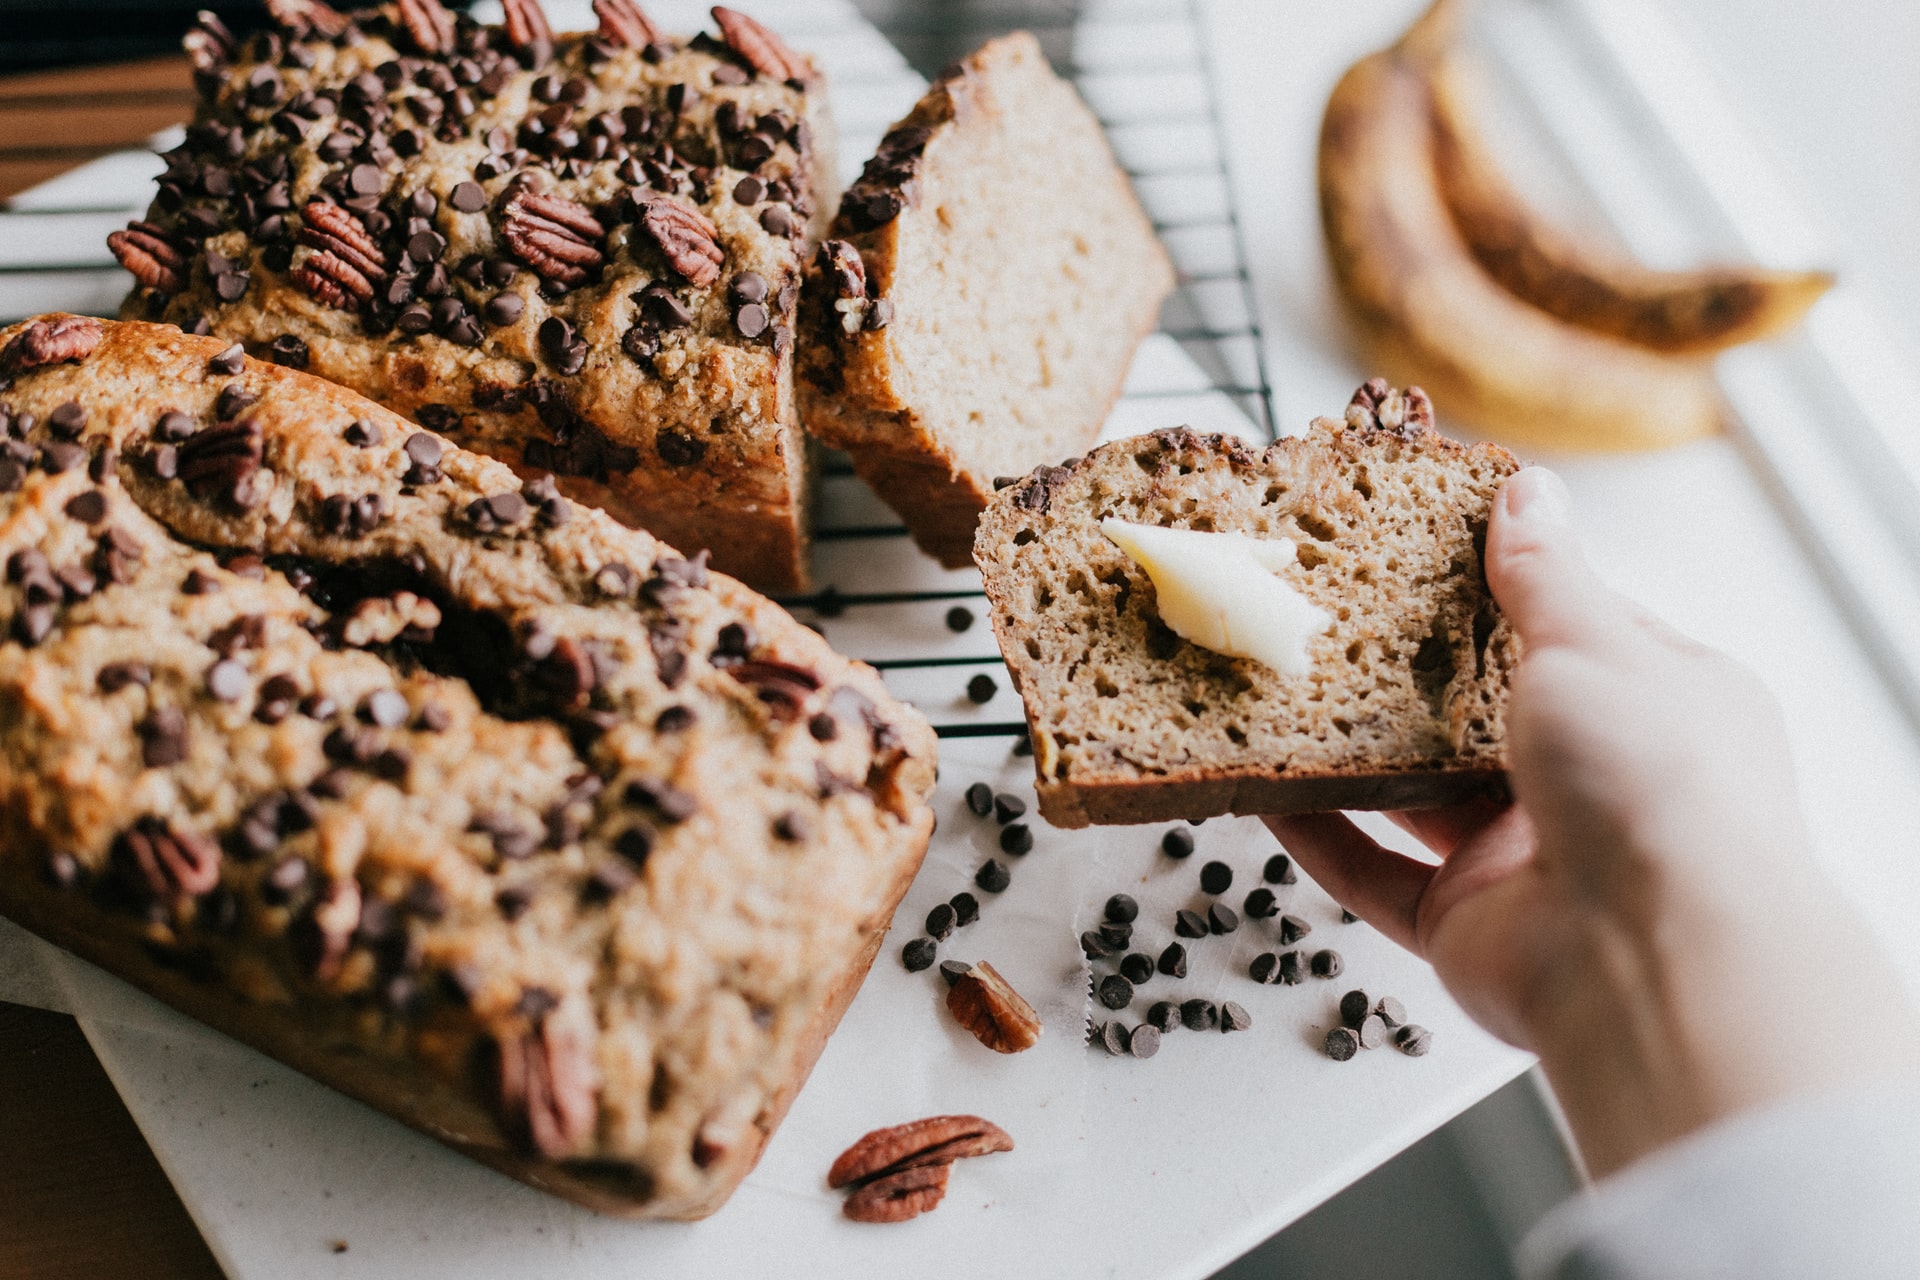 How to start a banana bread business